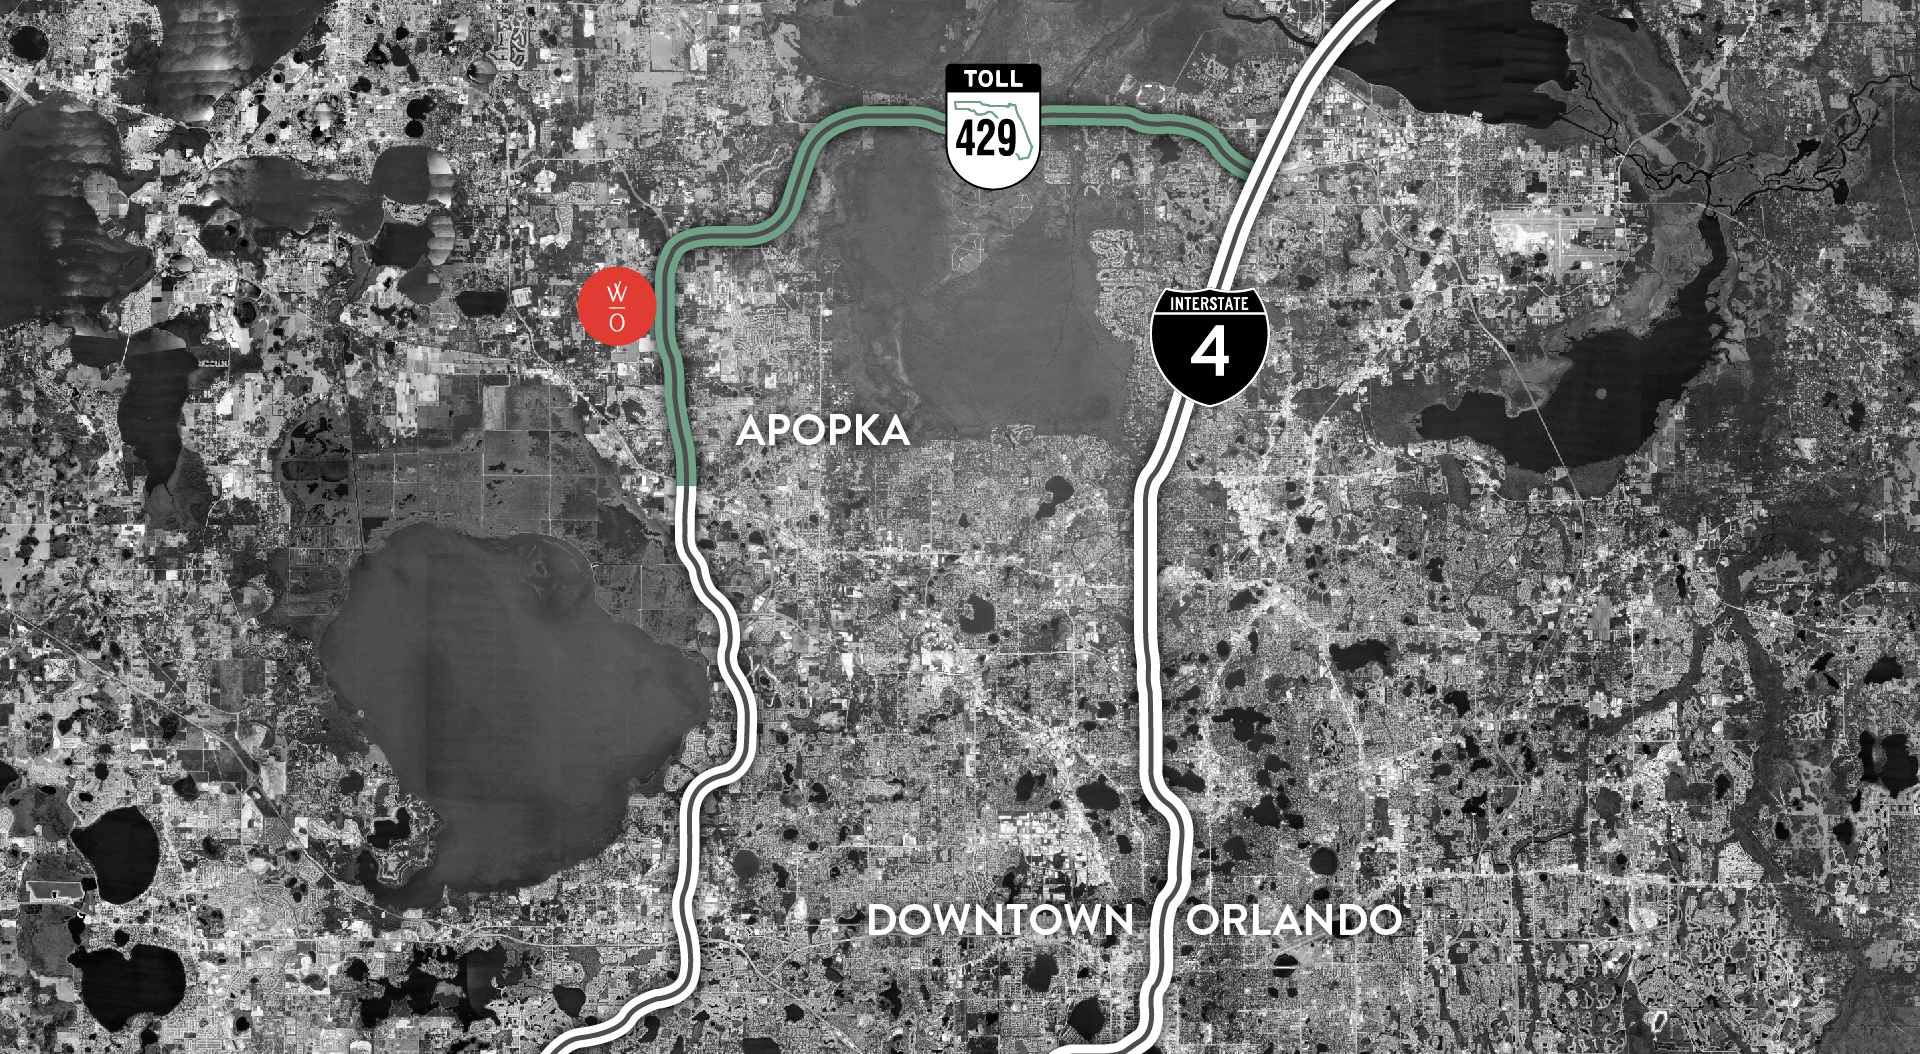 black and white satellite photo of Apopka and downtown Orlando with highways highlighted